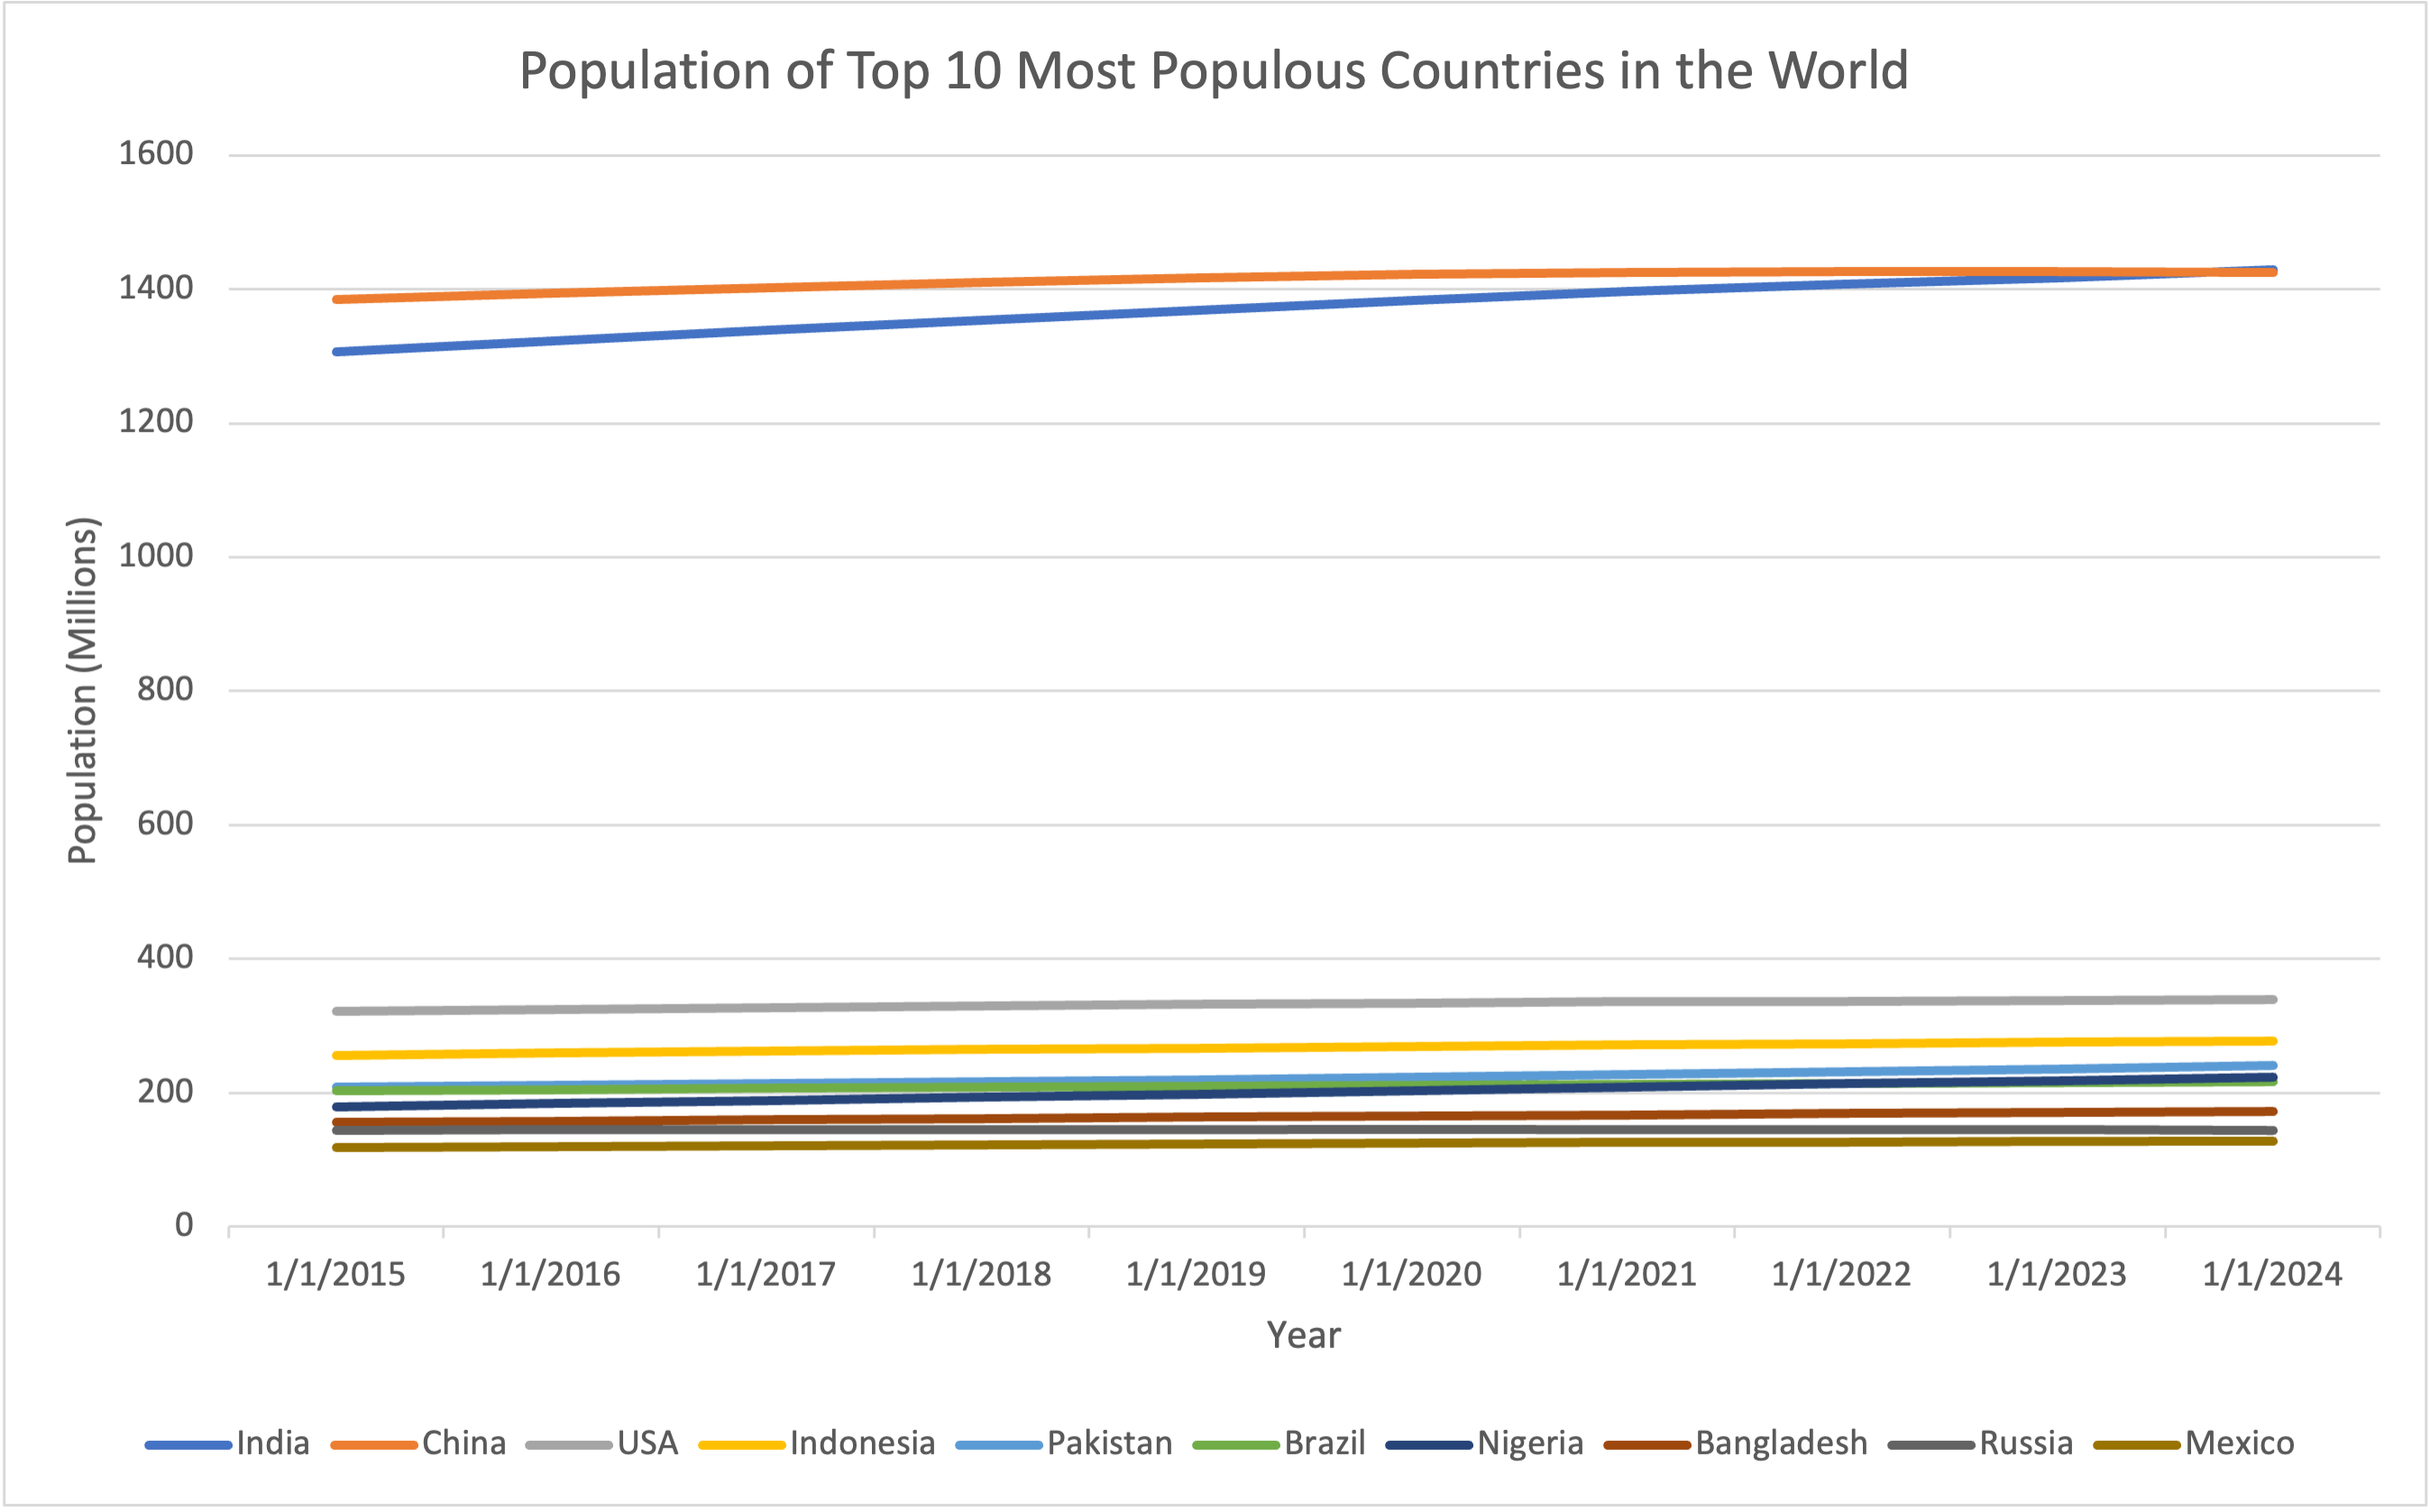 Line graph showing the population growth among the top 10 most populous countries